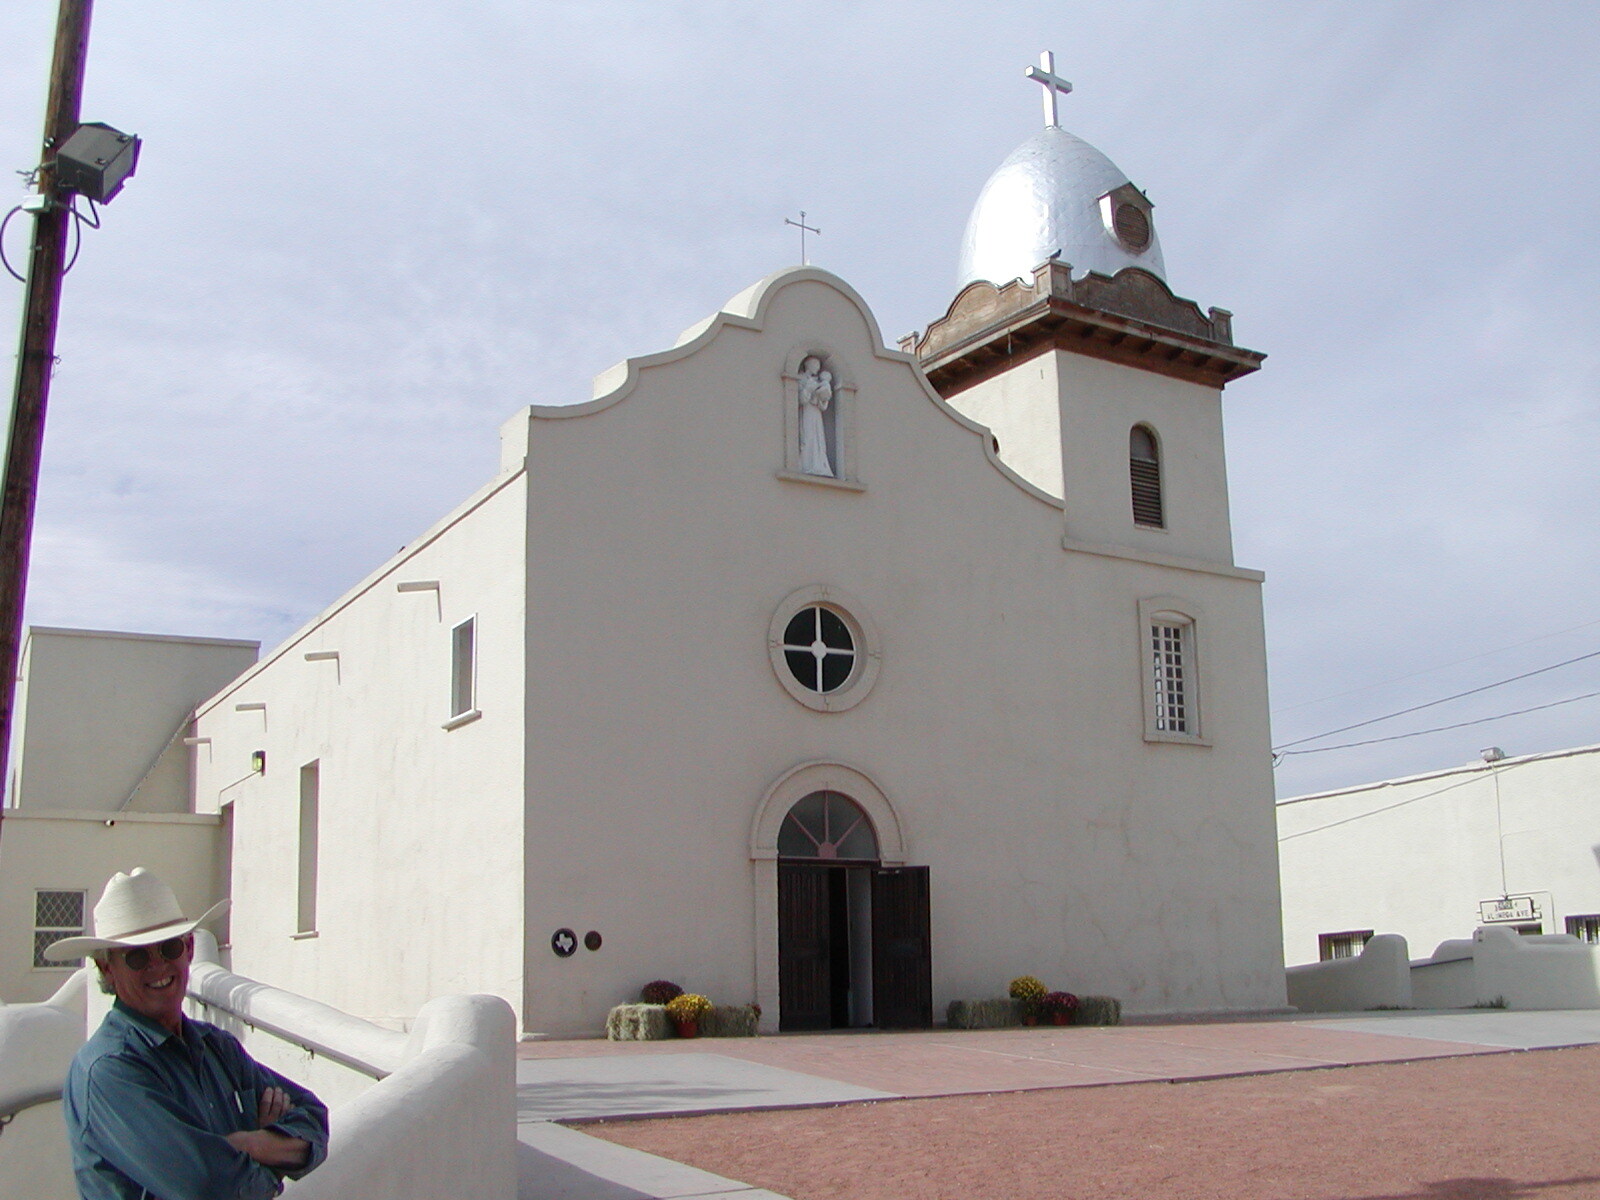 A view from the front entry of the Ysleta Mission in El Paso, TX